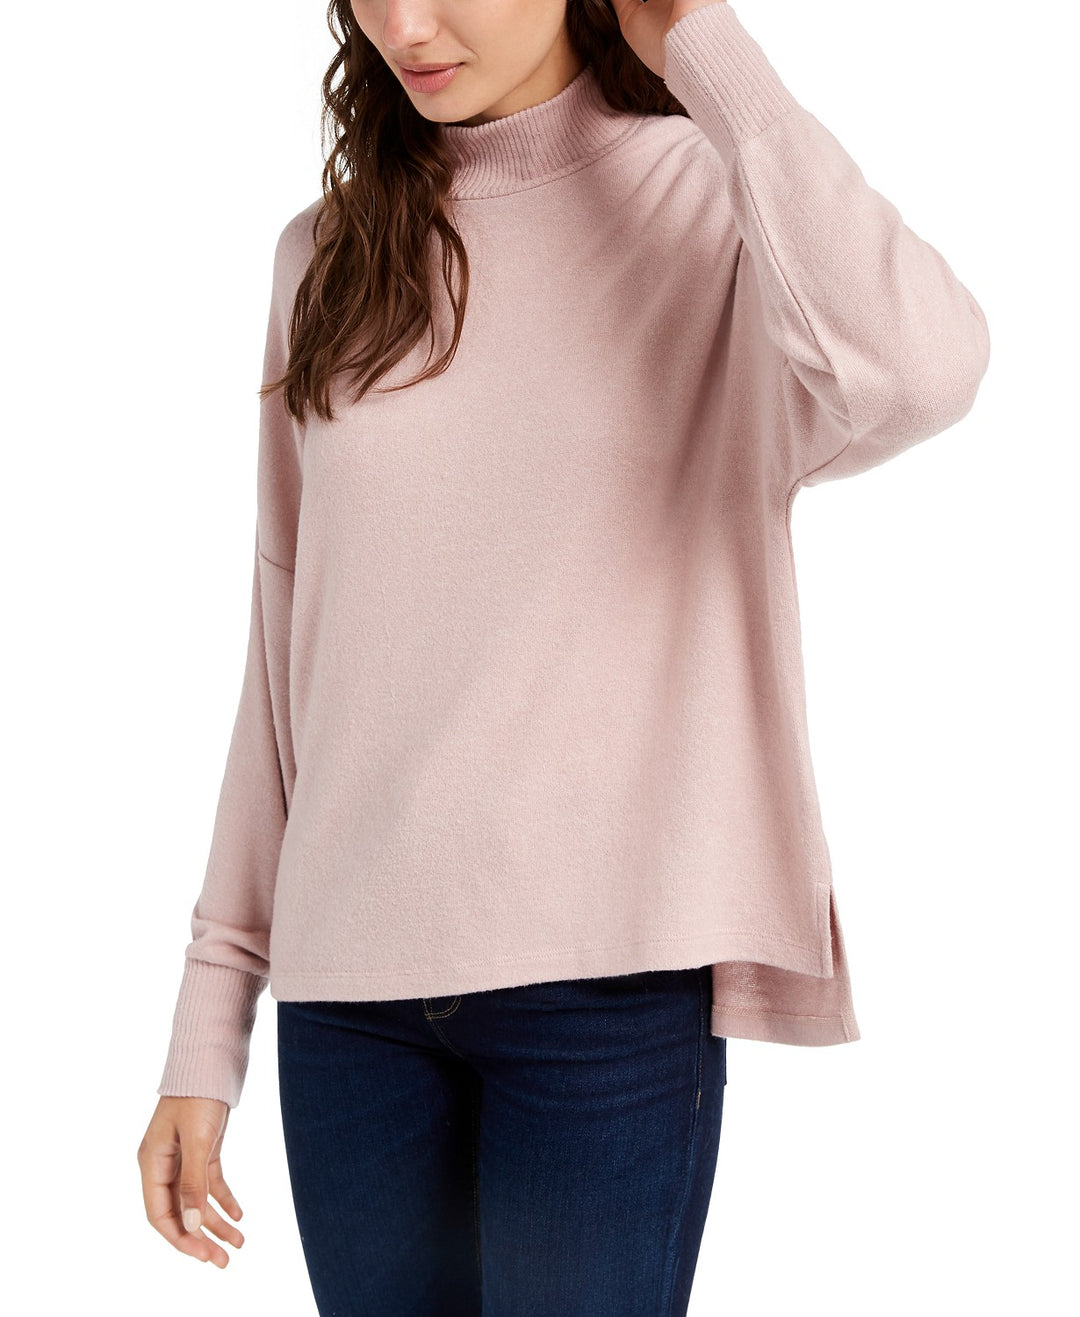 Hippie Rose Juniors' Women's Cozy Mock Neck Pullover Pink Size X-Small